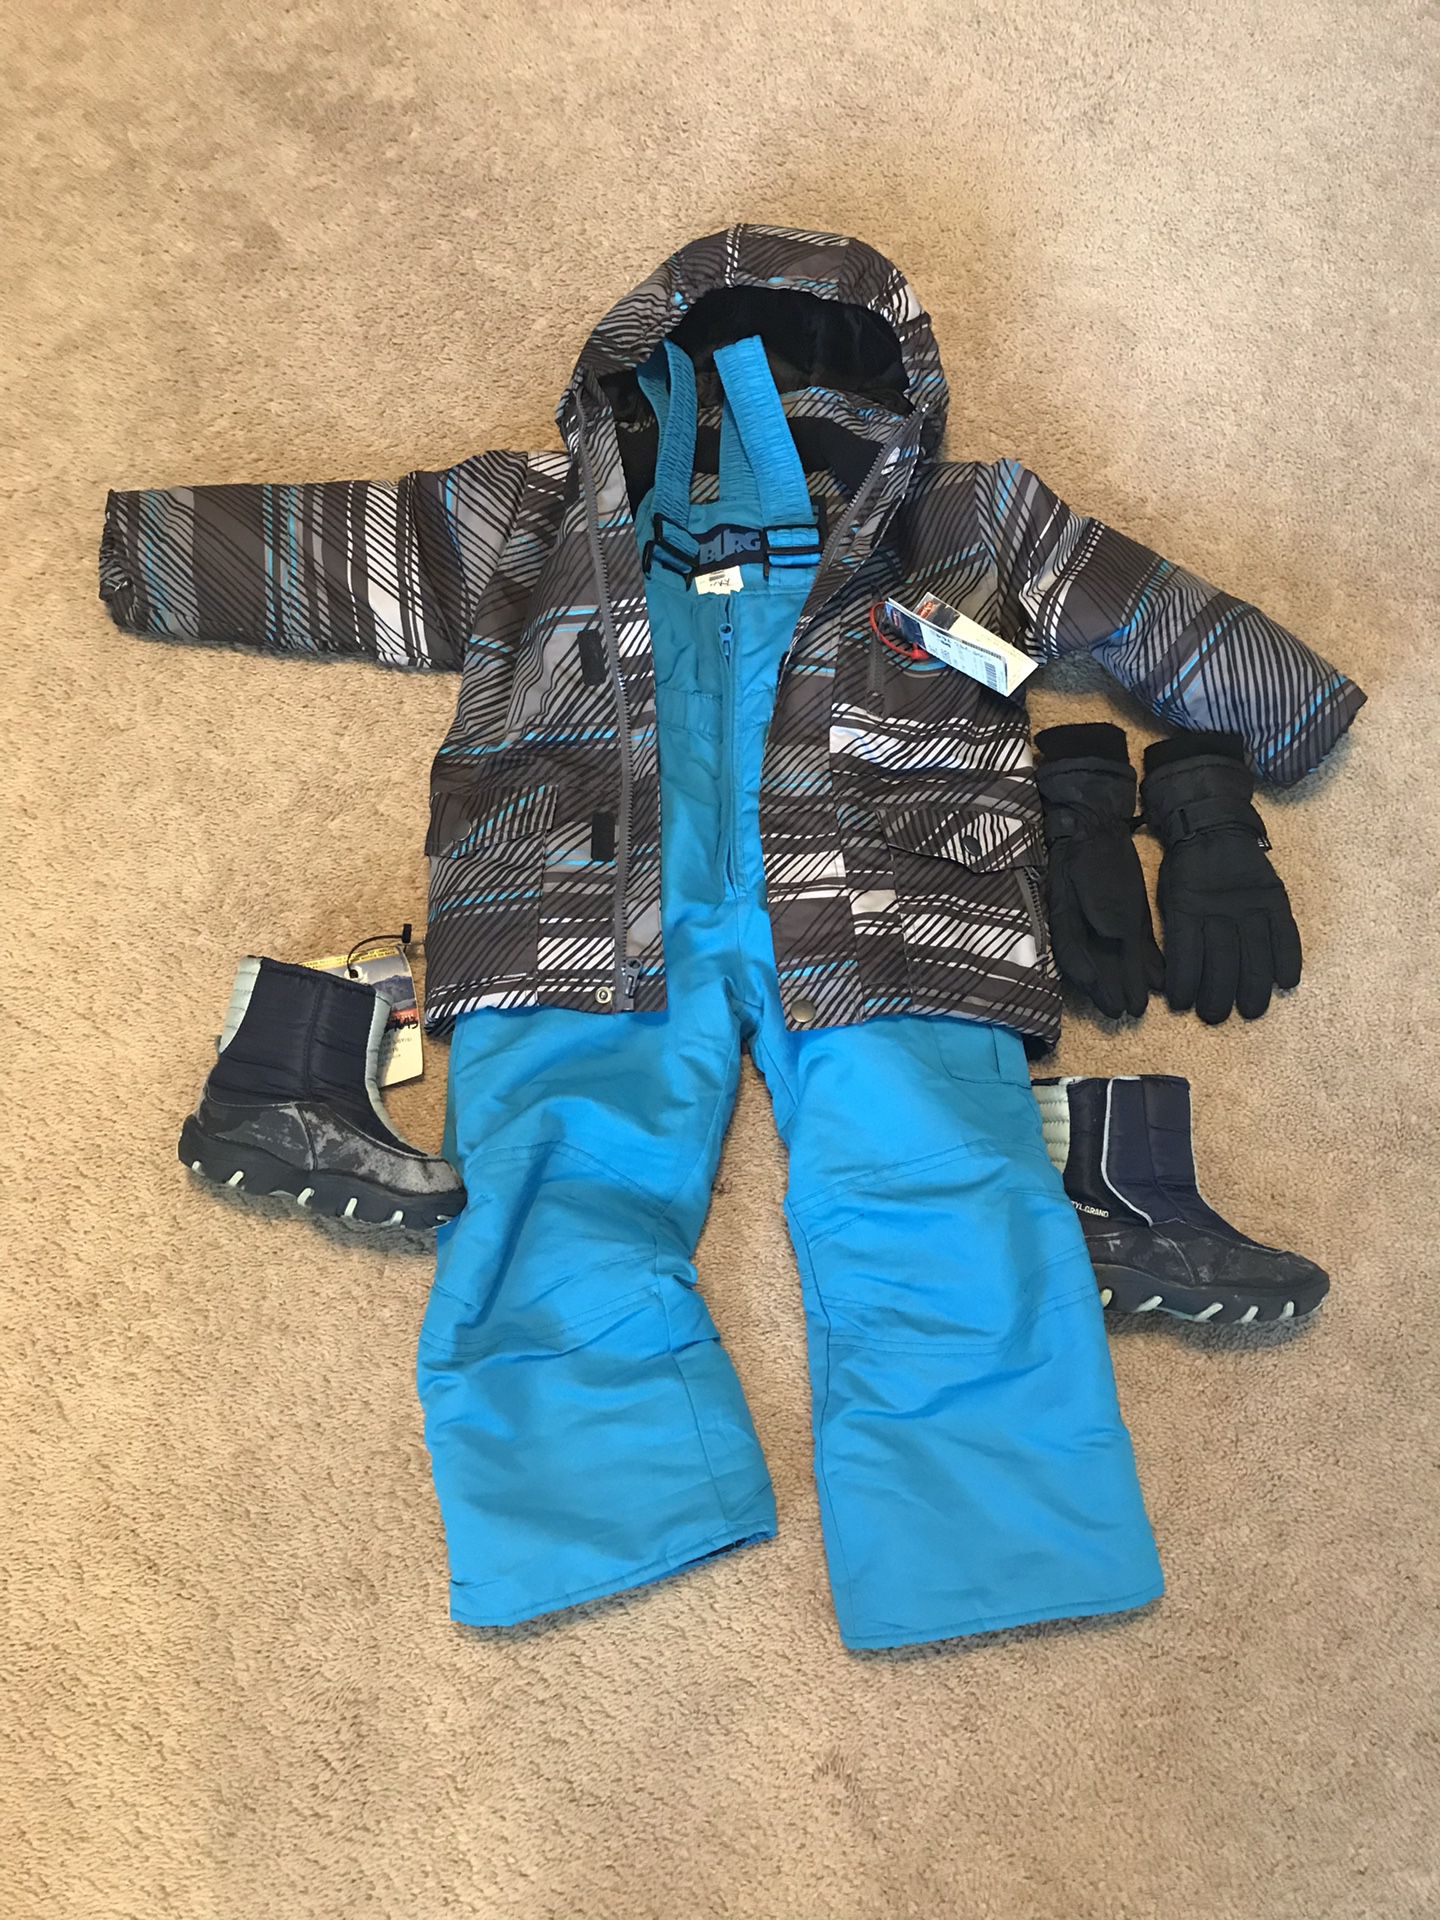 Complete Child Outfit for Skiing (Size 4 Years)